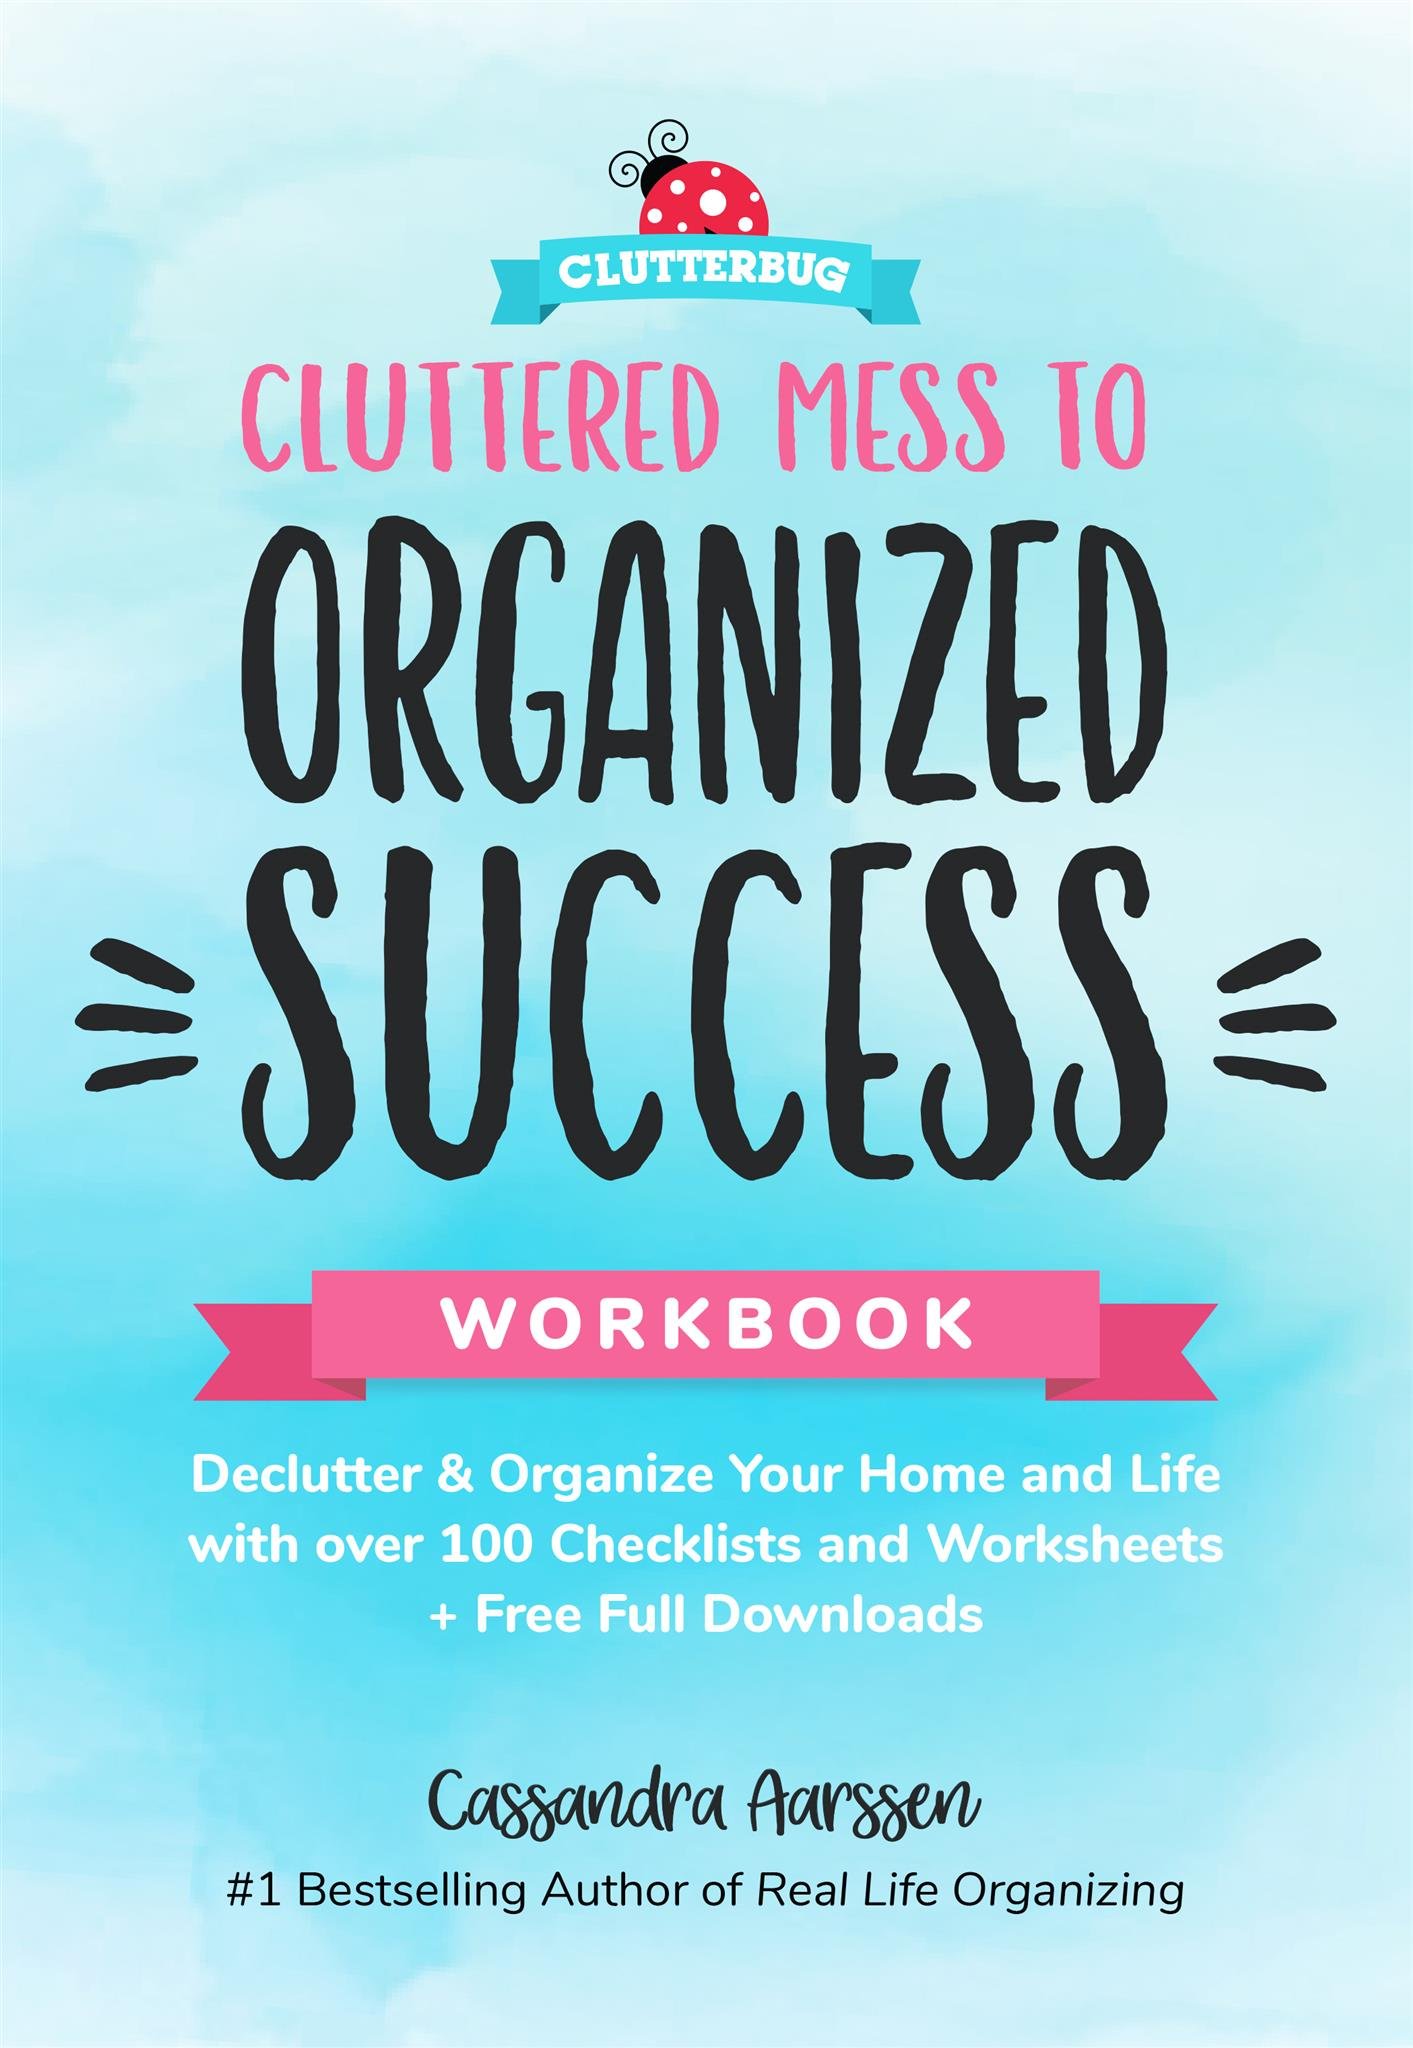 The blue book cover for Cluttered Mess to Organized Success Workbook by Cassandra Aarssen.